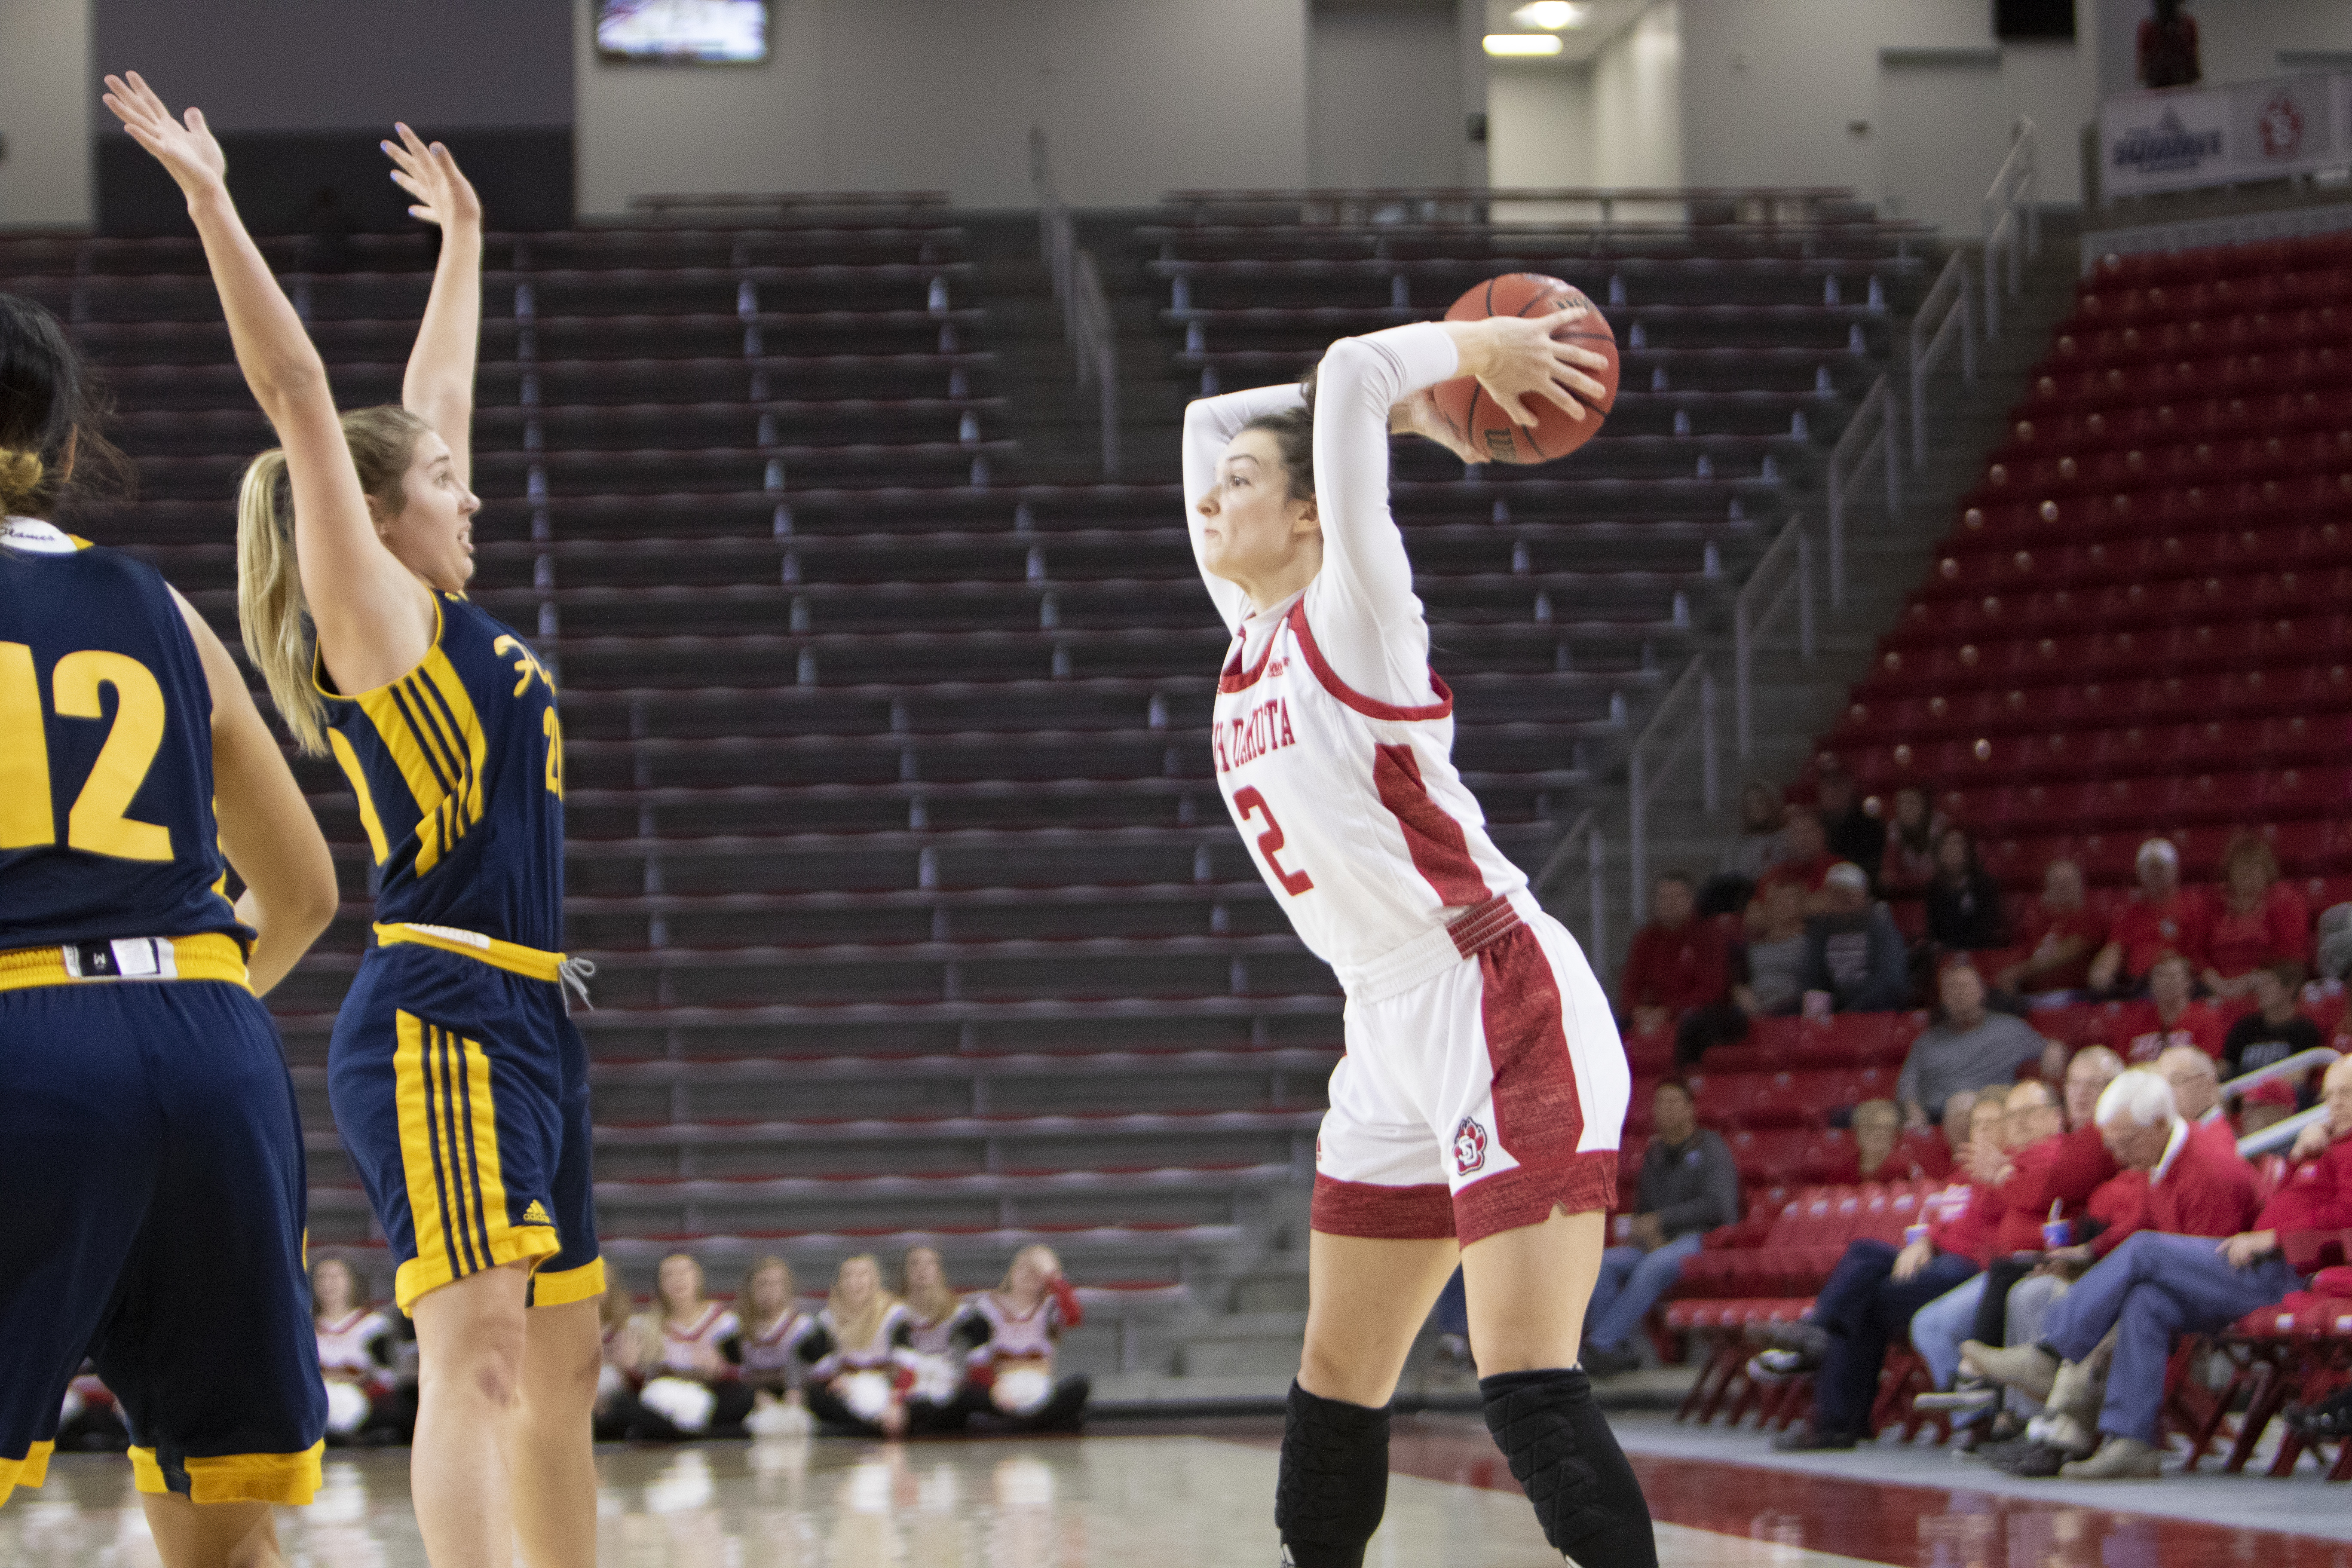 USD women take down another AP-top 25 opponent in Missouri